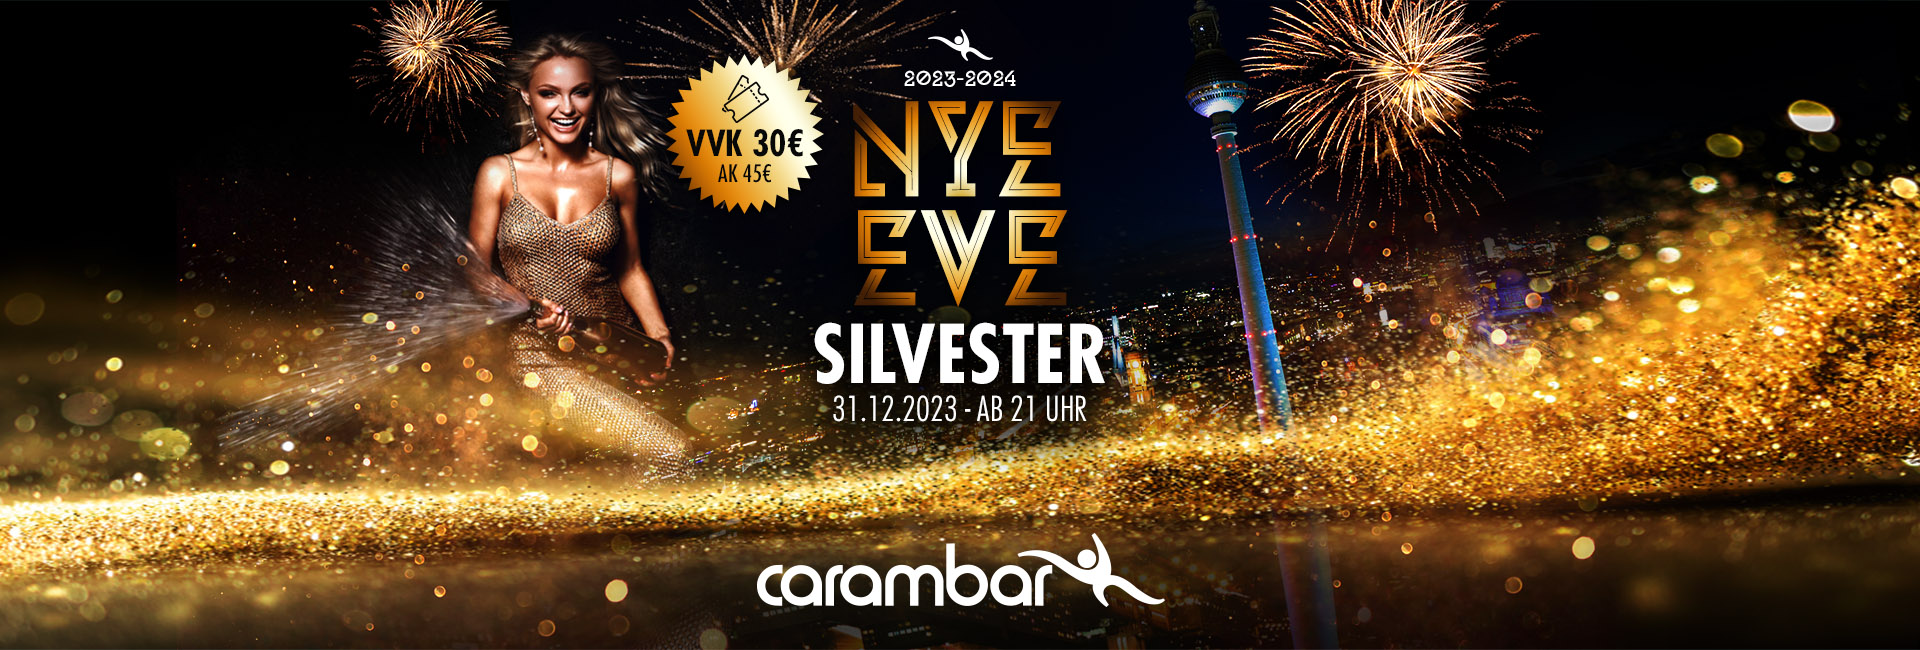 Silvester-2023-2024-Webseite-1920x650